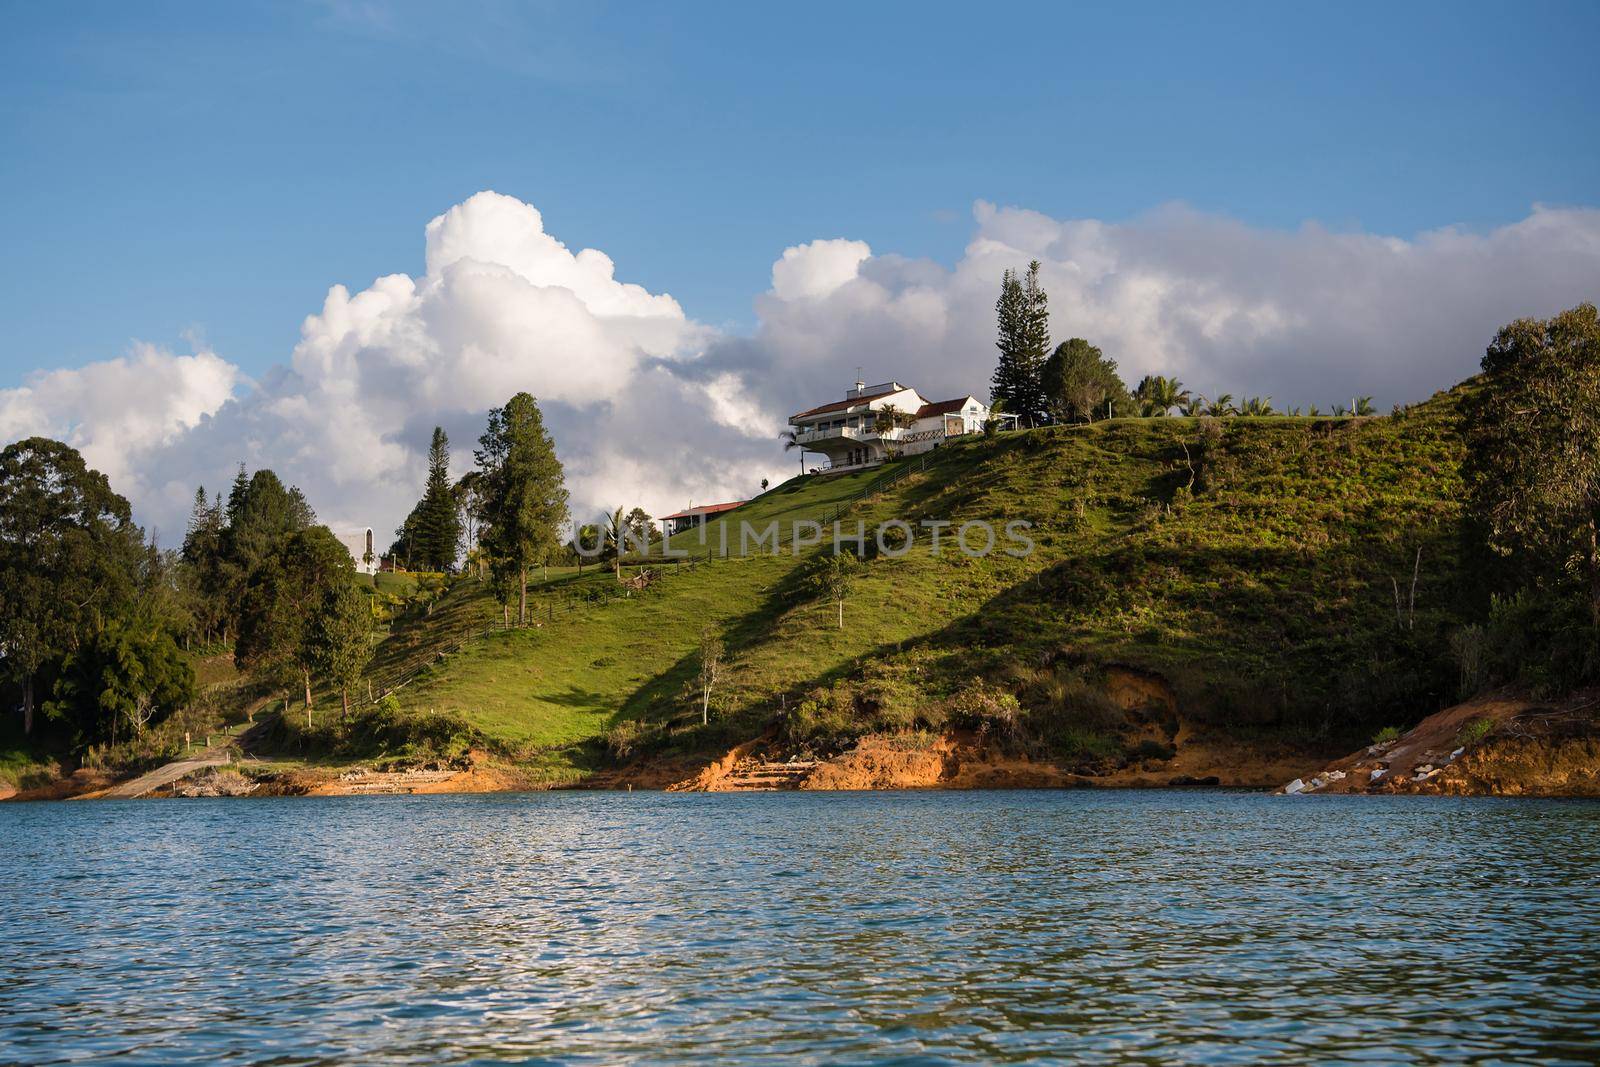 Grassy hillside with cloudy blue sky in the background and water in the foreground. View from a boat